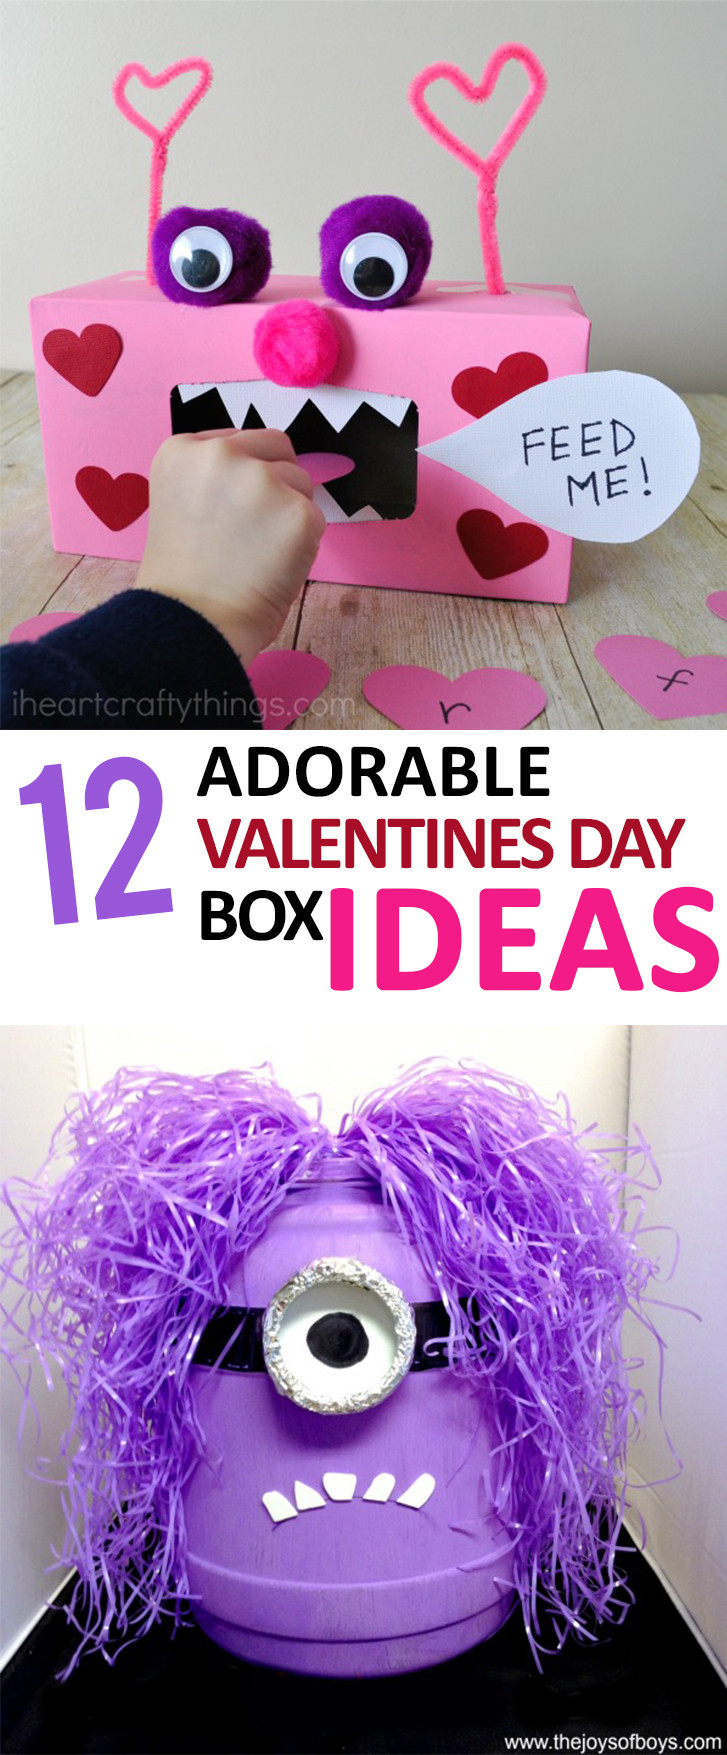 Valentines Day Boxes Ideas
 12 Adorable Valentines Day Box Ideas